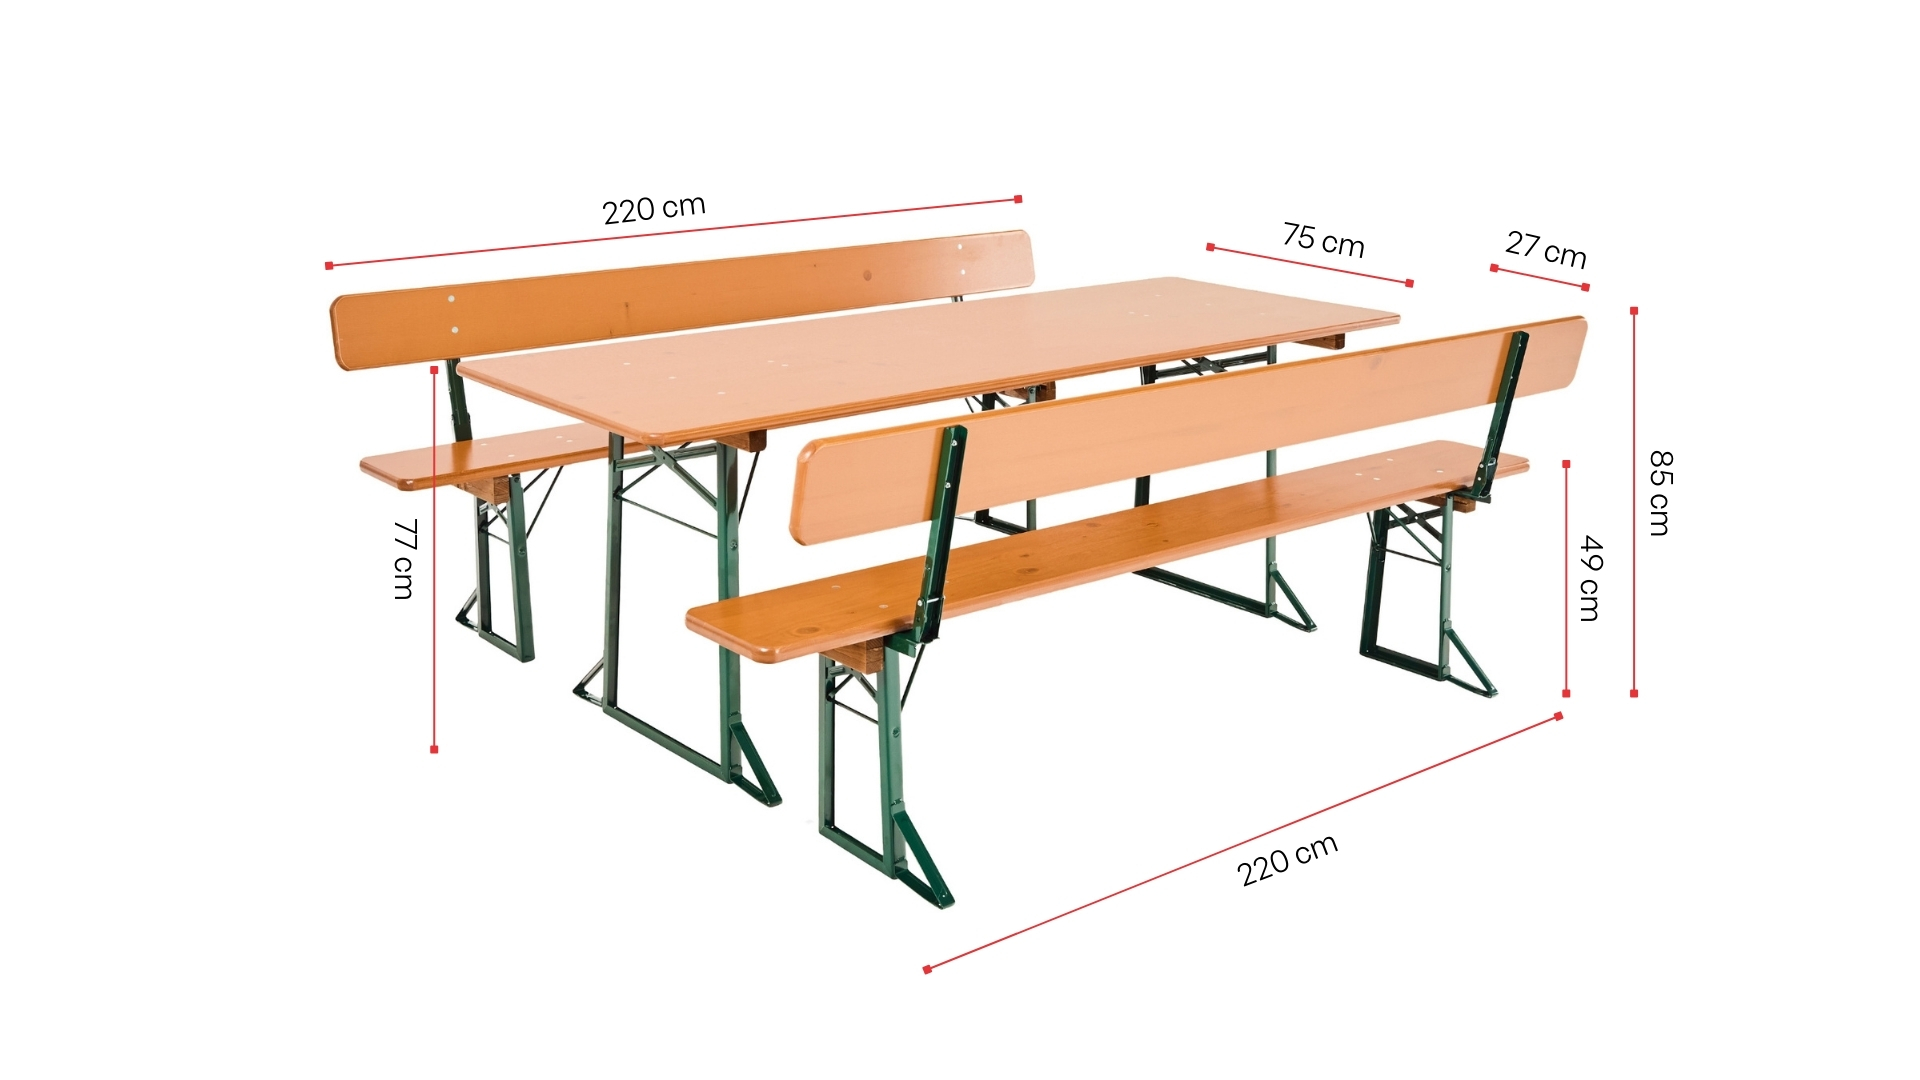 A wide beer garden table sets with backrest is shown with its dimensions in pine.